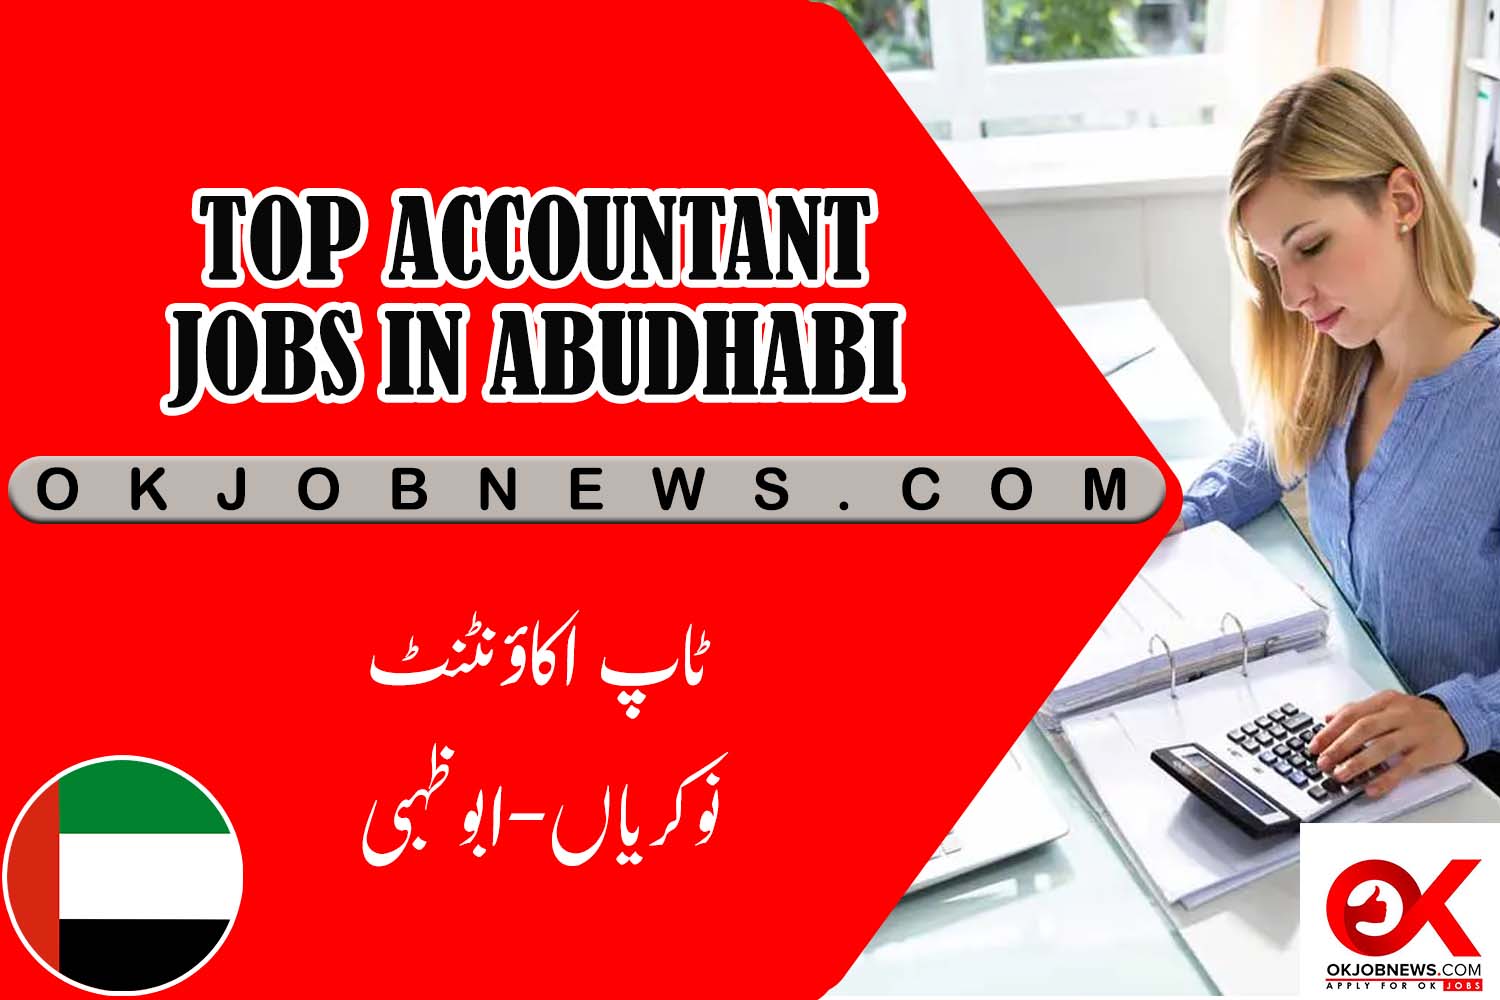 Top Accountant Jobs in Abu Dhabi Opportunities and Requirements